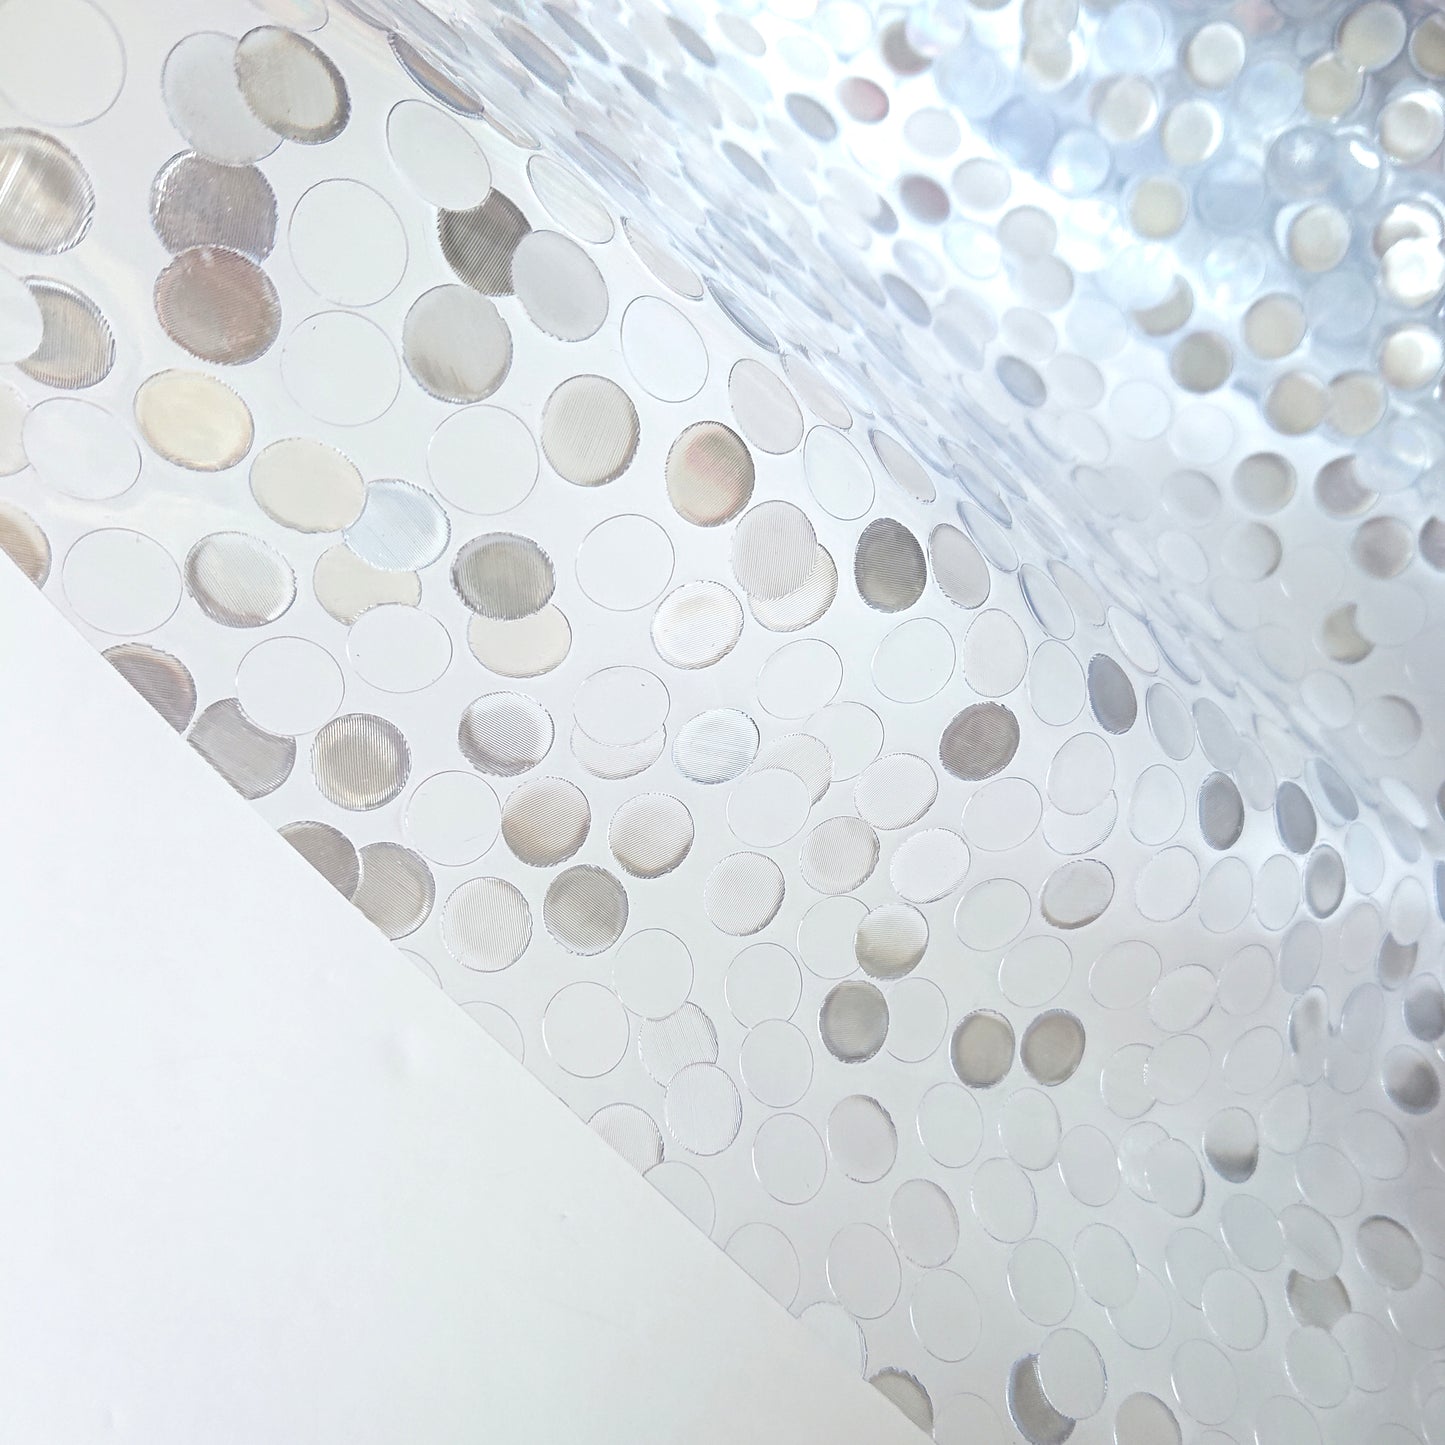 Vinyl - Transparent with embossed glazing dots